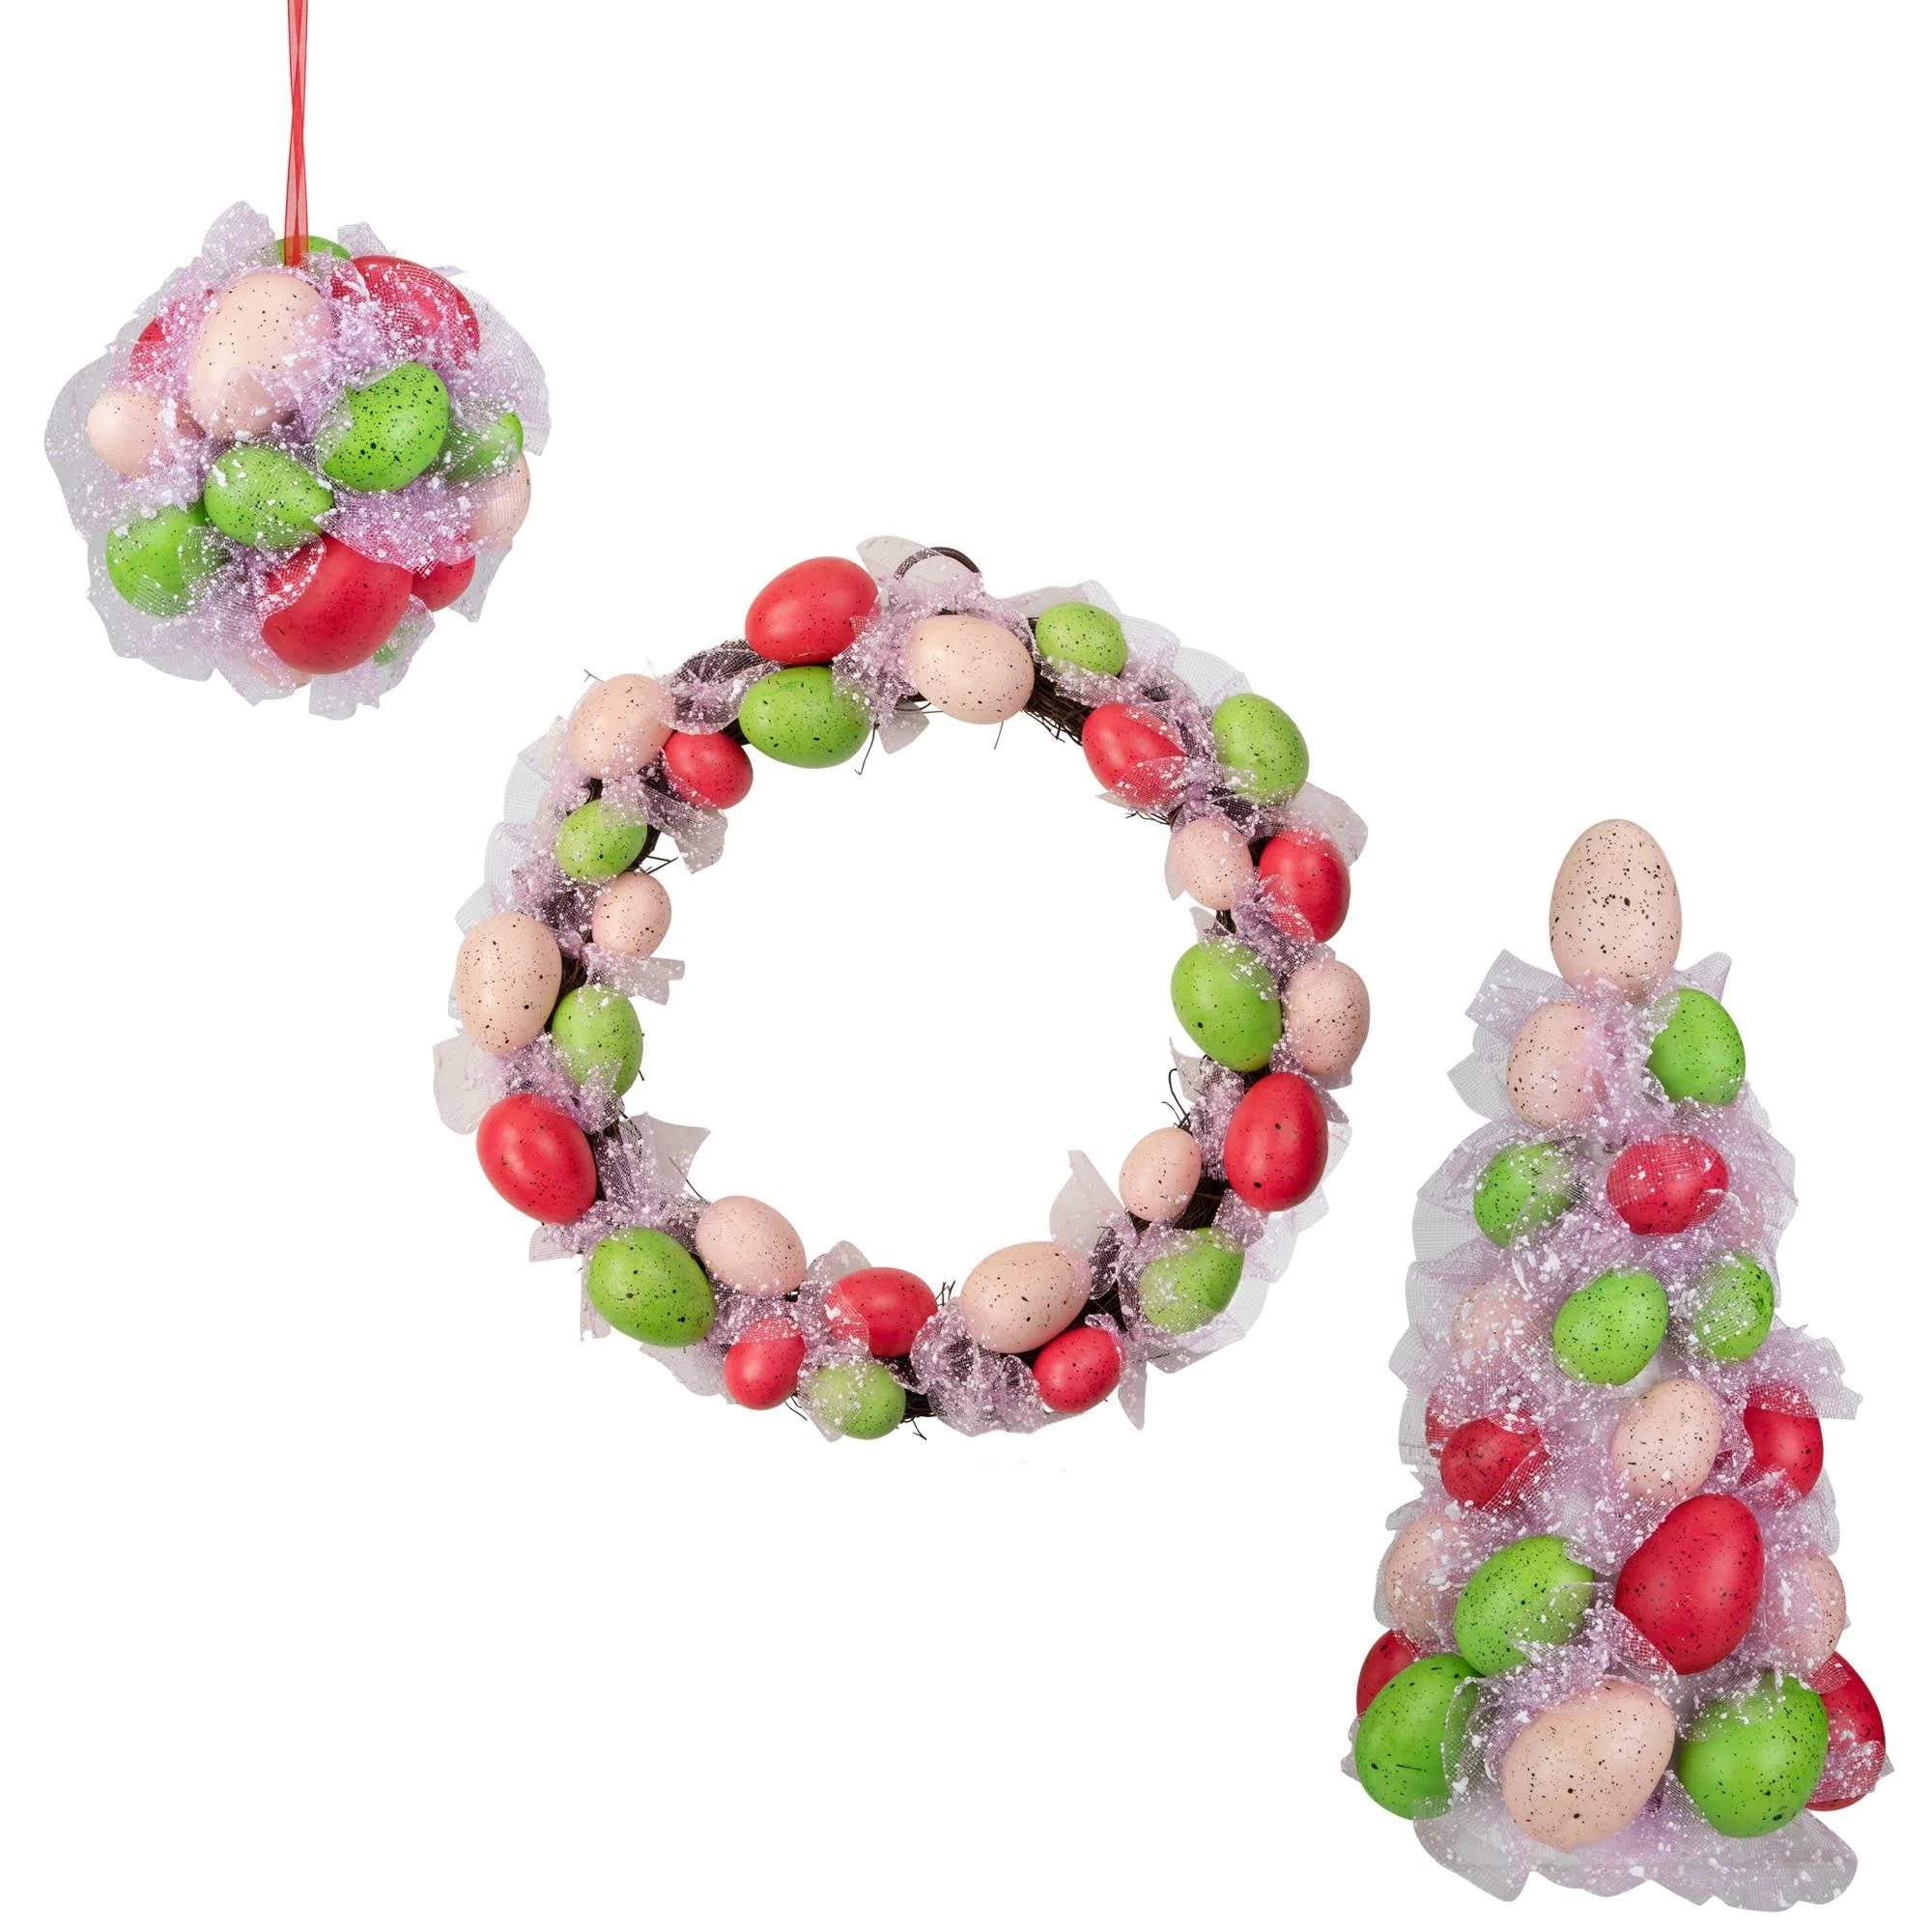 Northlight Speckled Easter Egg Tree and Wreath Set | Image